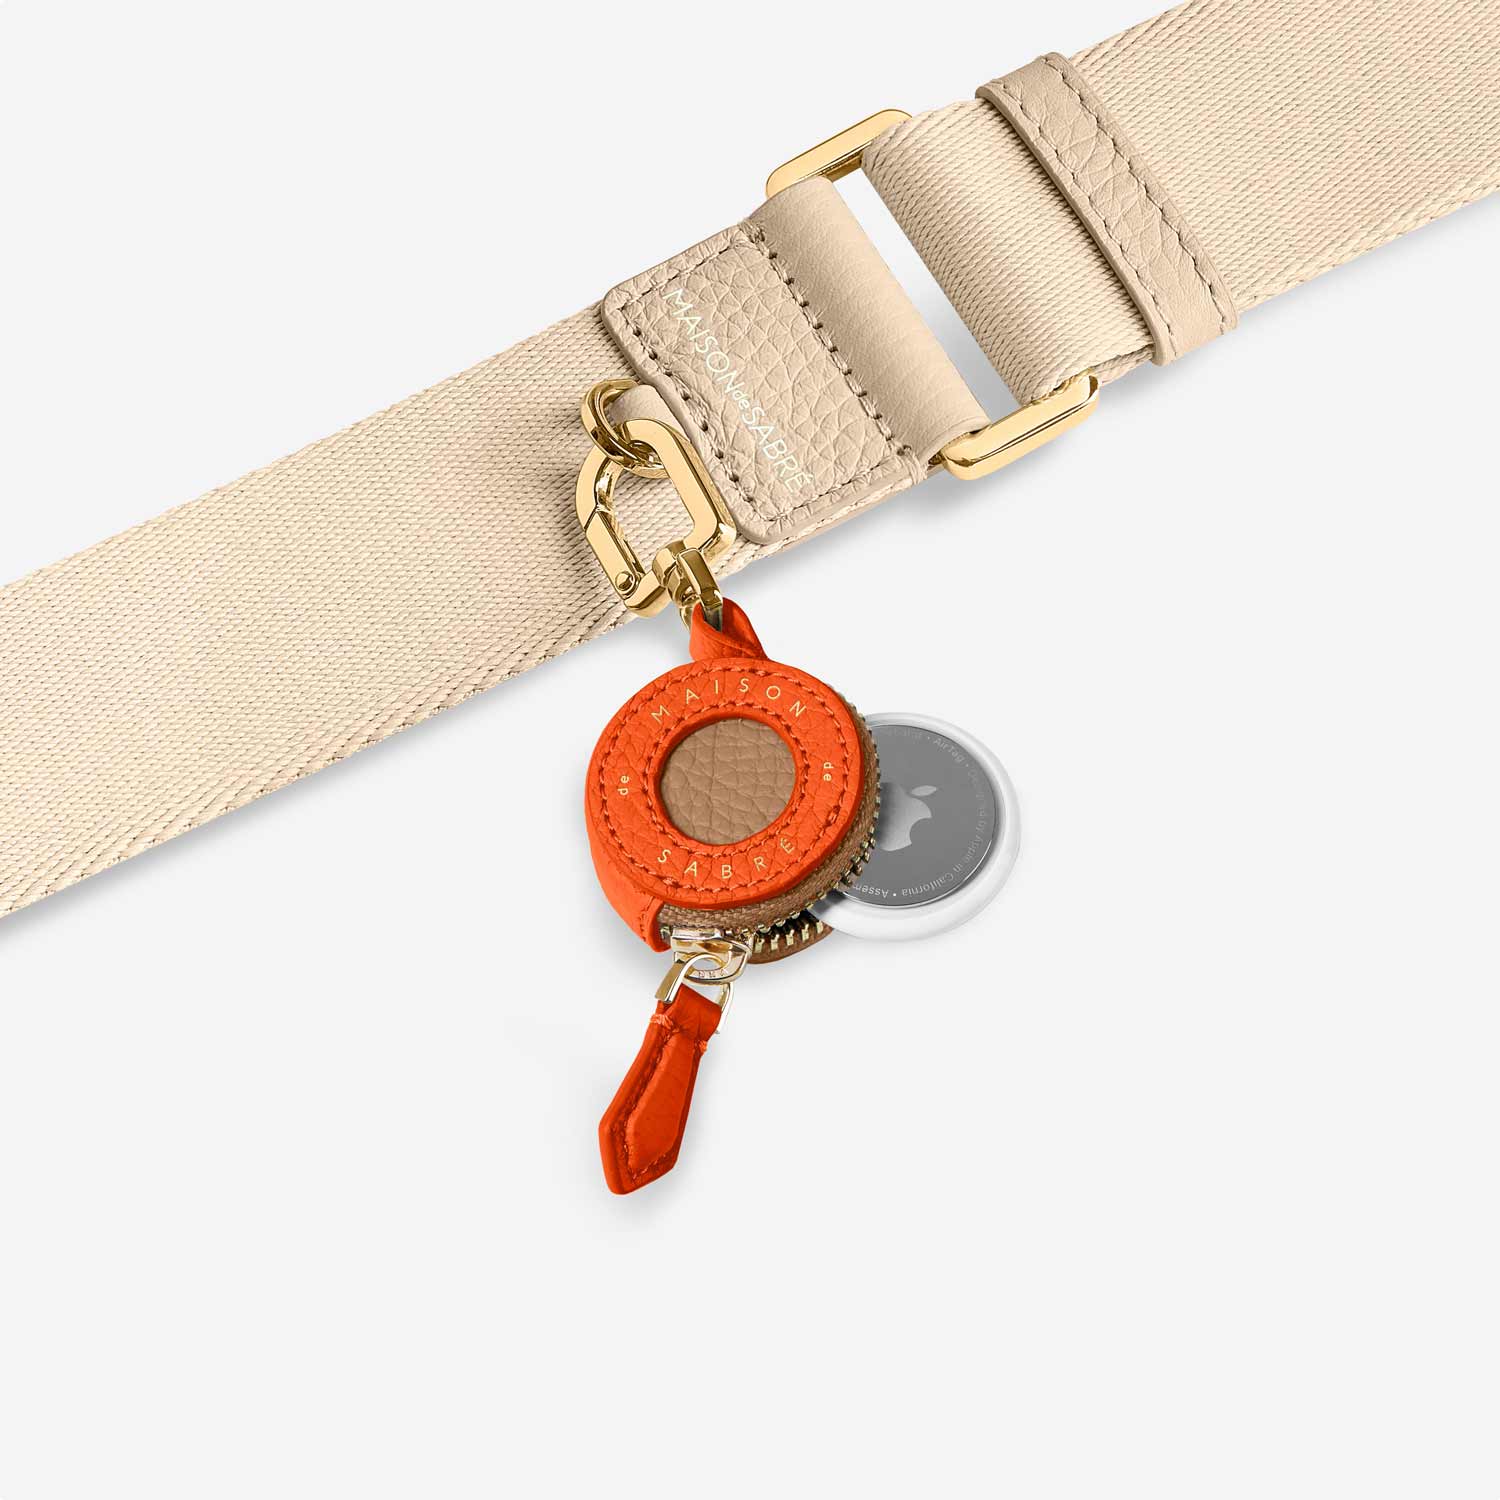 Repurposed Upcycled Apple Watch Band LV - $45 New With Tags - From Lily